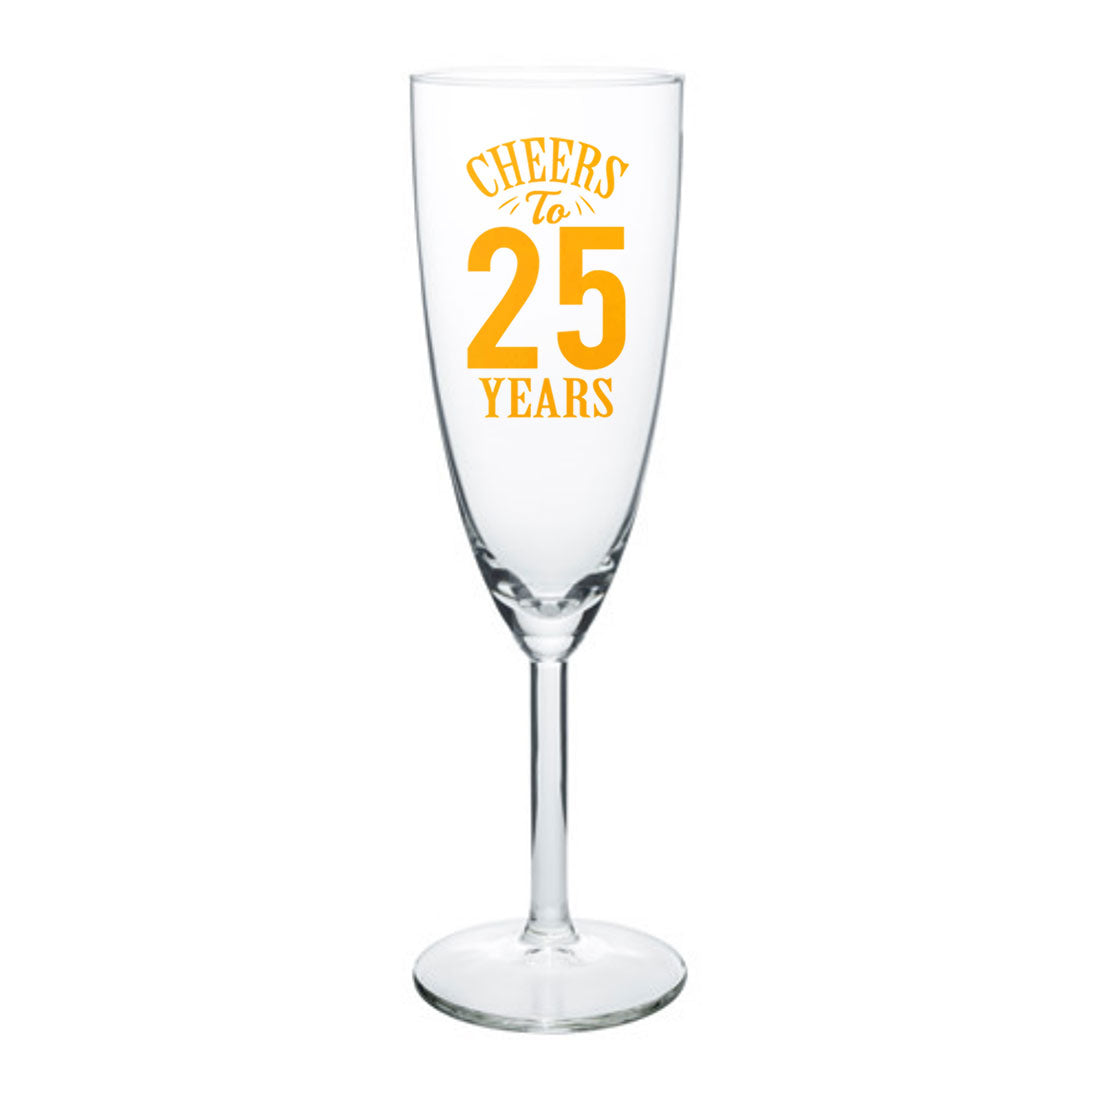 Personalized Champagne Glass Birthday Gifts Idea - Add Any Number